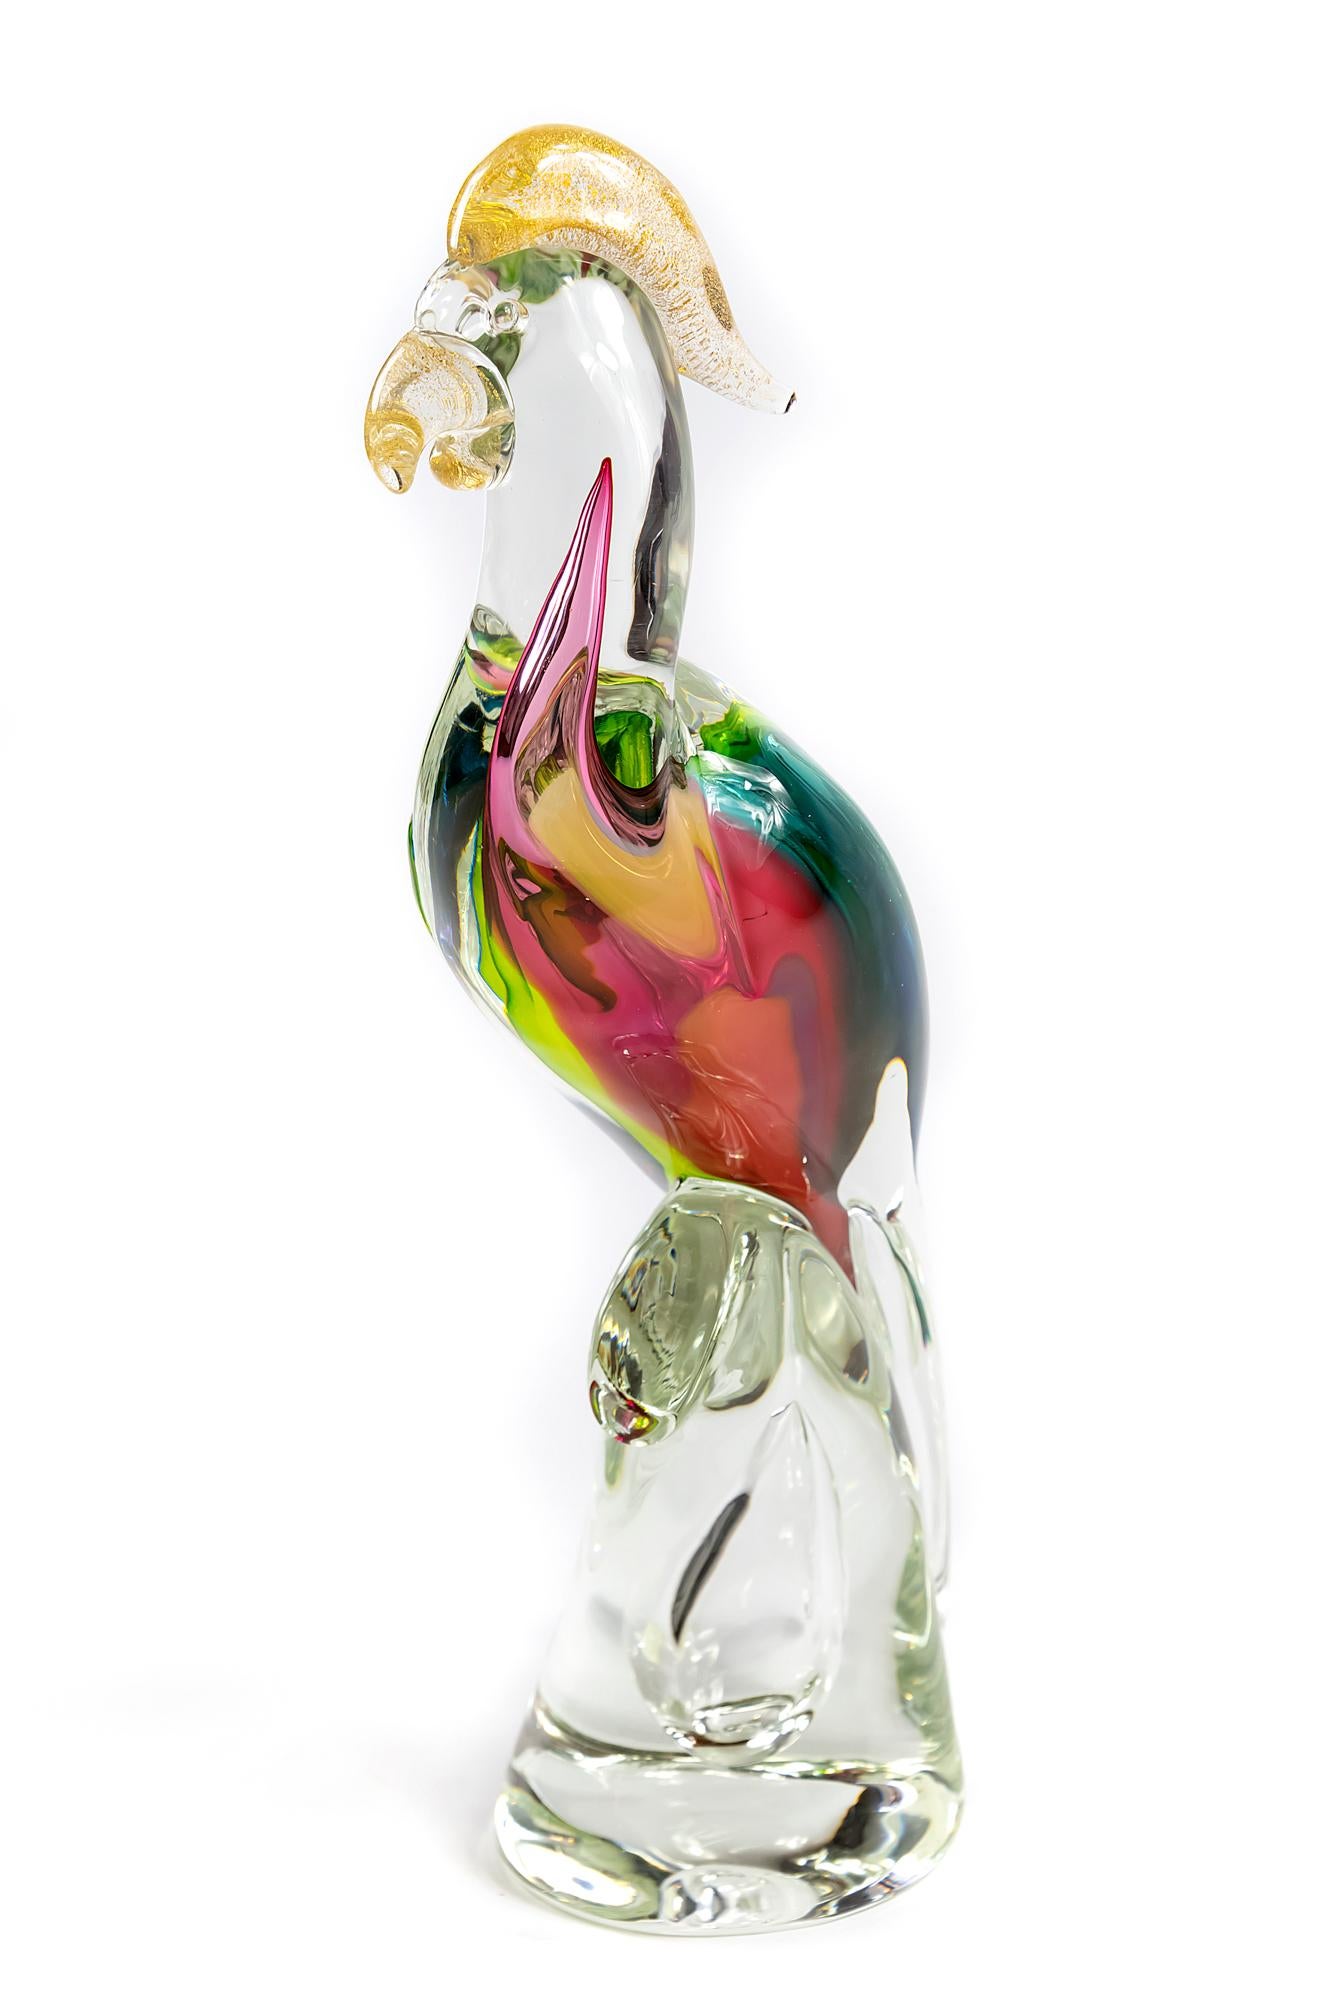 Italian handmade Marcolin crystal parrot figure with inlaid gold dust and different colors. Signed Marcolin Made in Italy.
It is heavy.